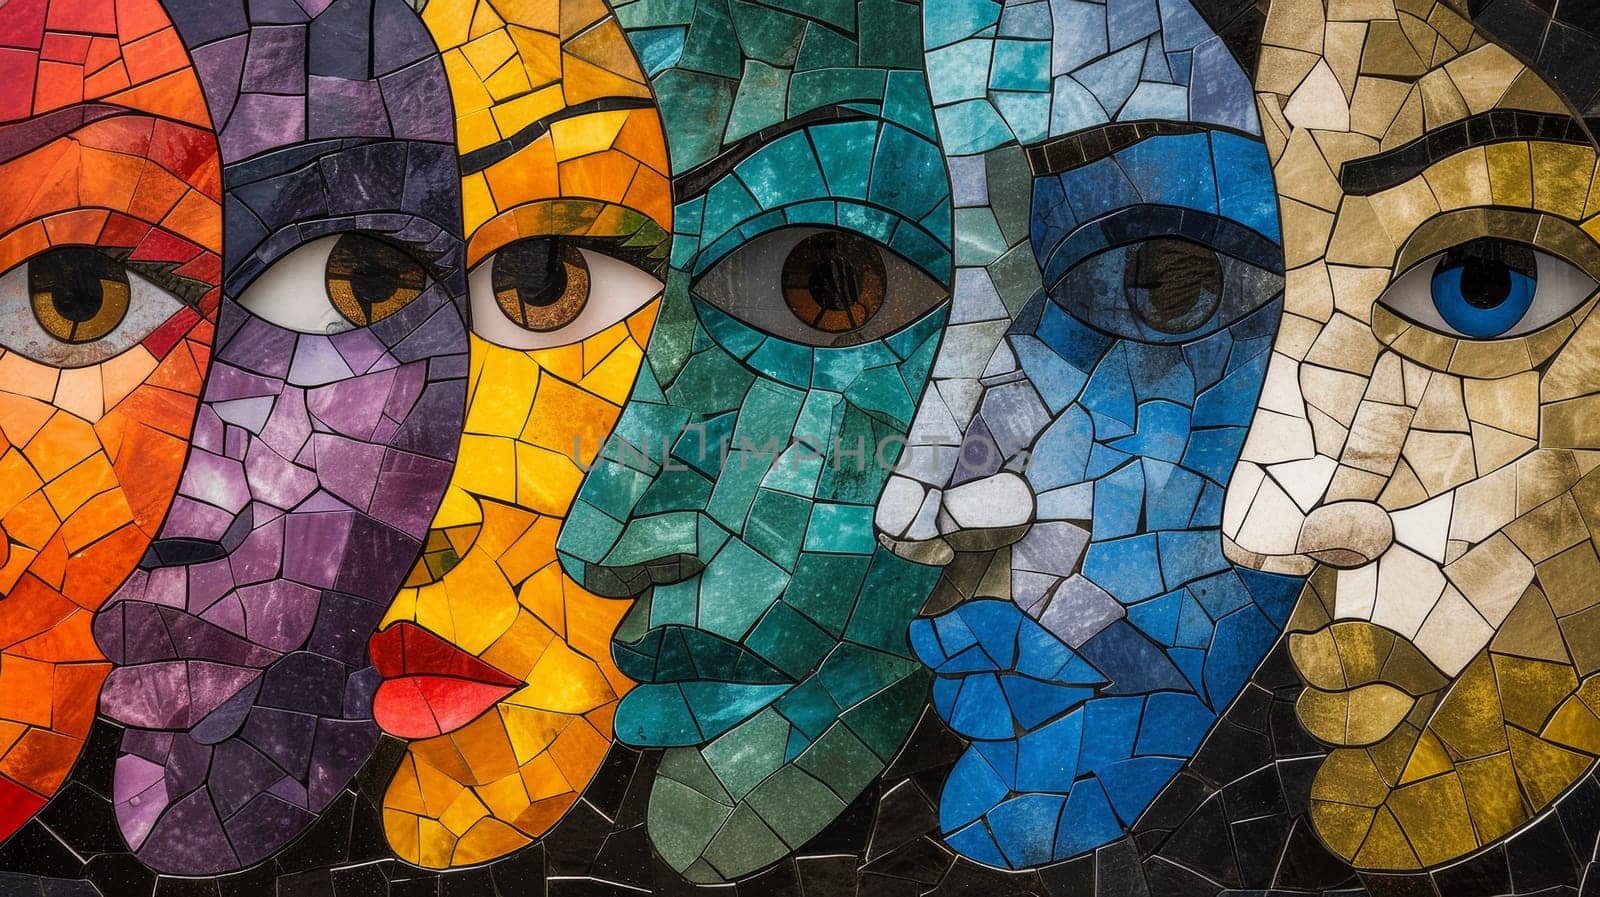 A mosaic of a group of faces painted in different colors, AI by starush